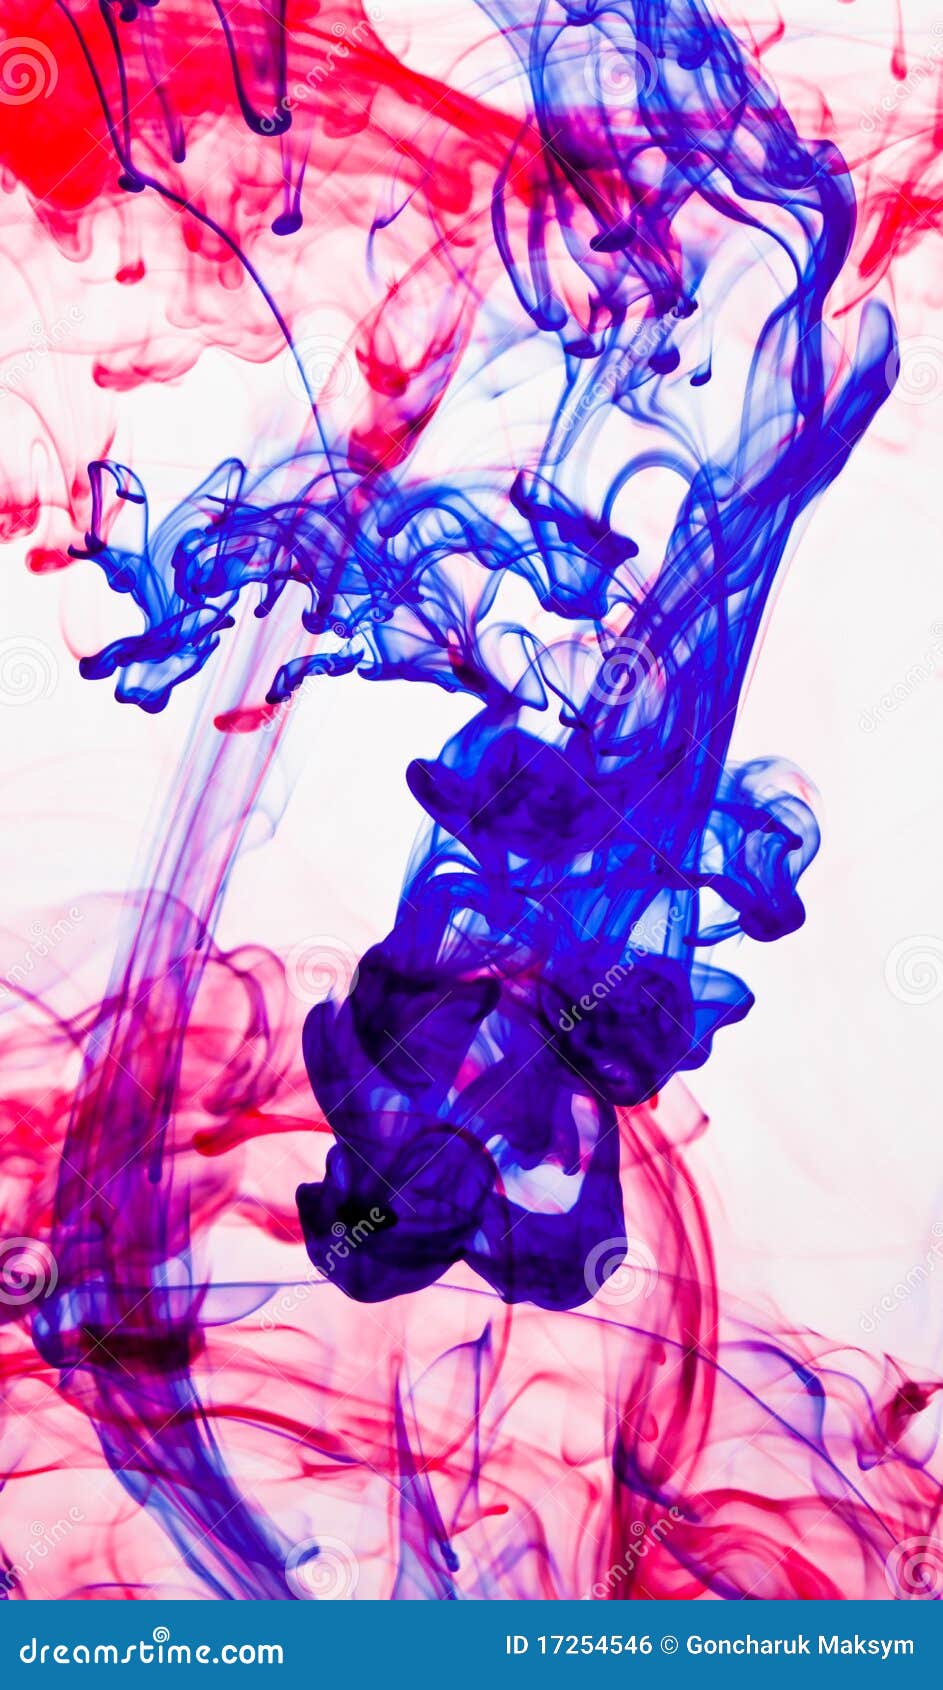 Abstract Ink In Water Royalty Free Stock Image - Image: 17254546